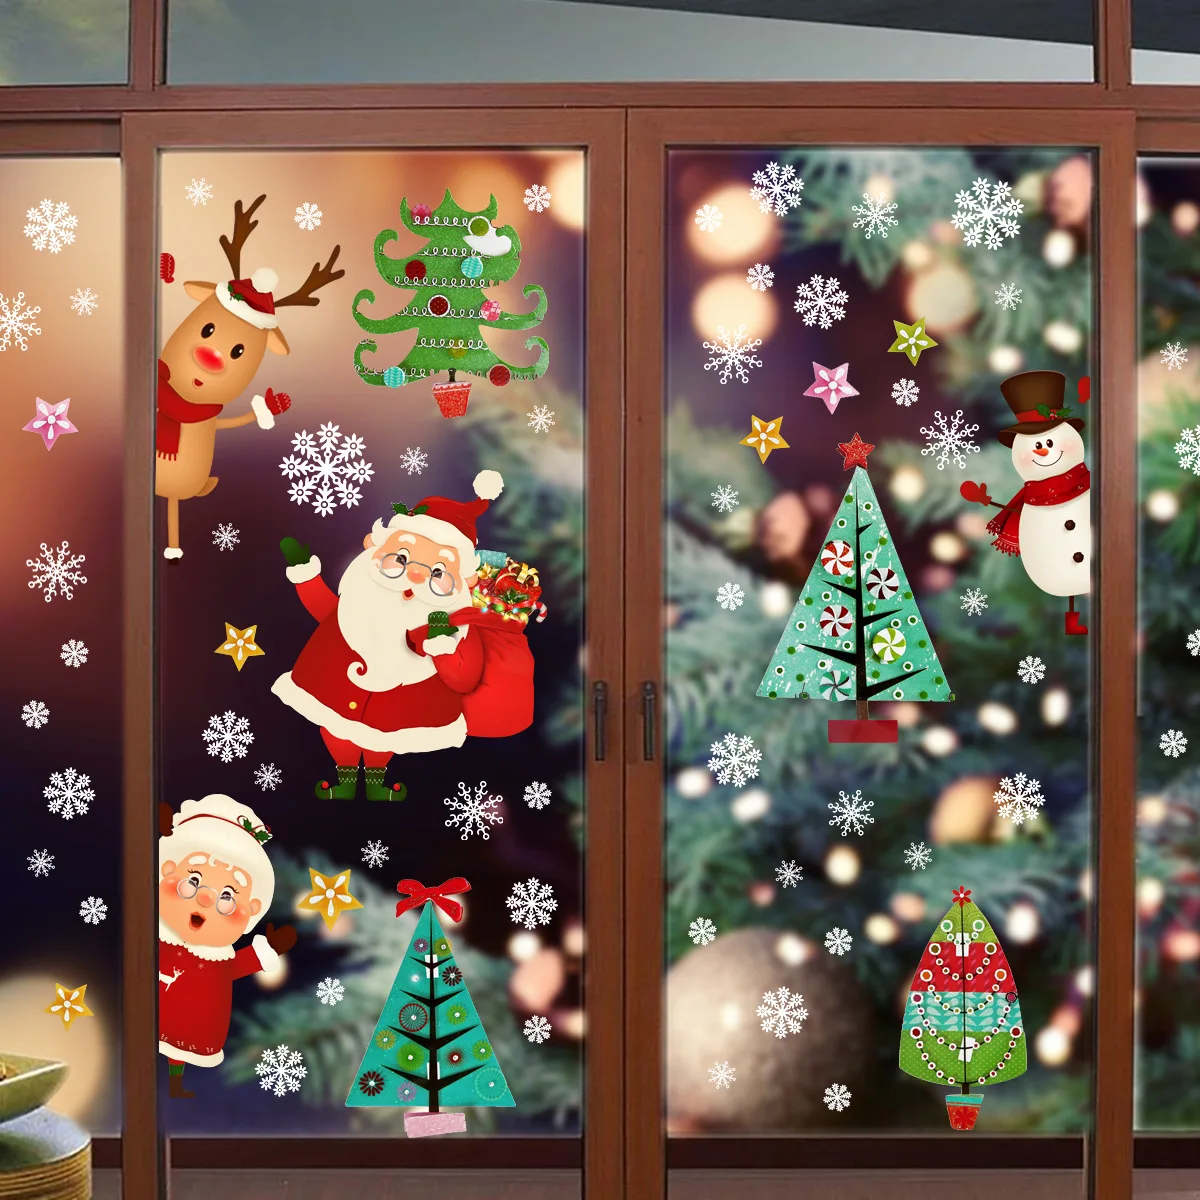 4pcs Santa Claus Snowflake Wall Sticker Christmas Electrostatic Sticker Window Glass Double-sided Decorative Funny Wall Sticker a4 double sided suspended estate agent led window lightbox screens hanging signs